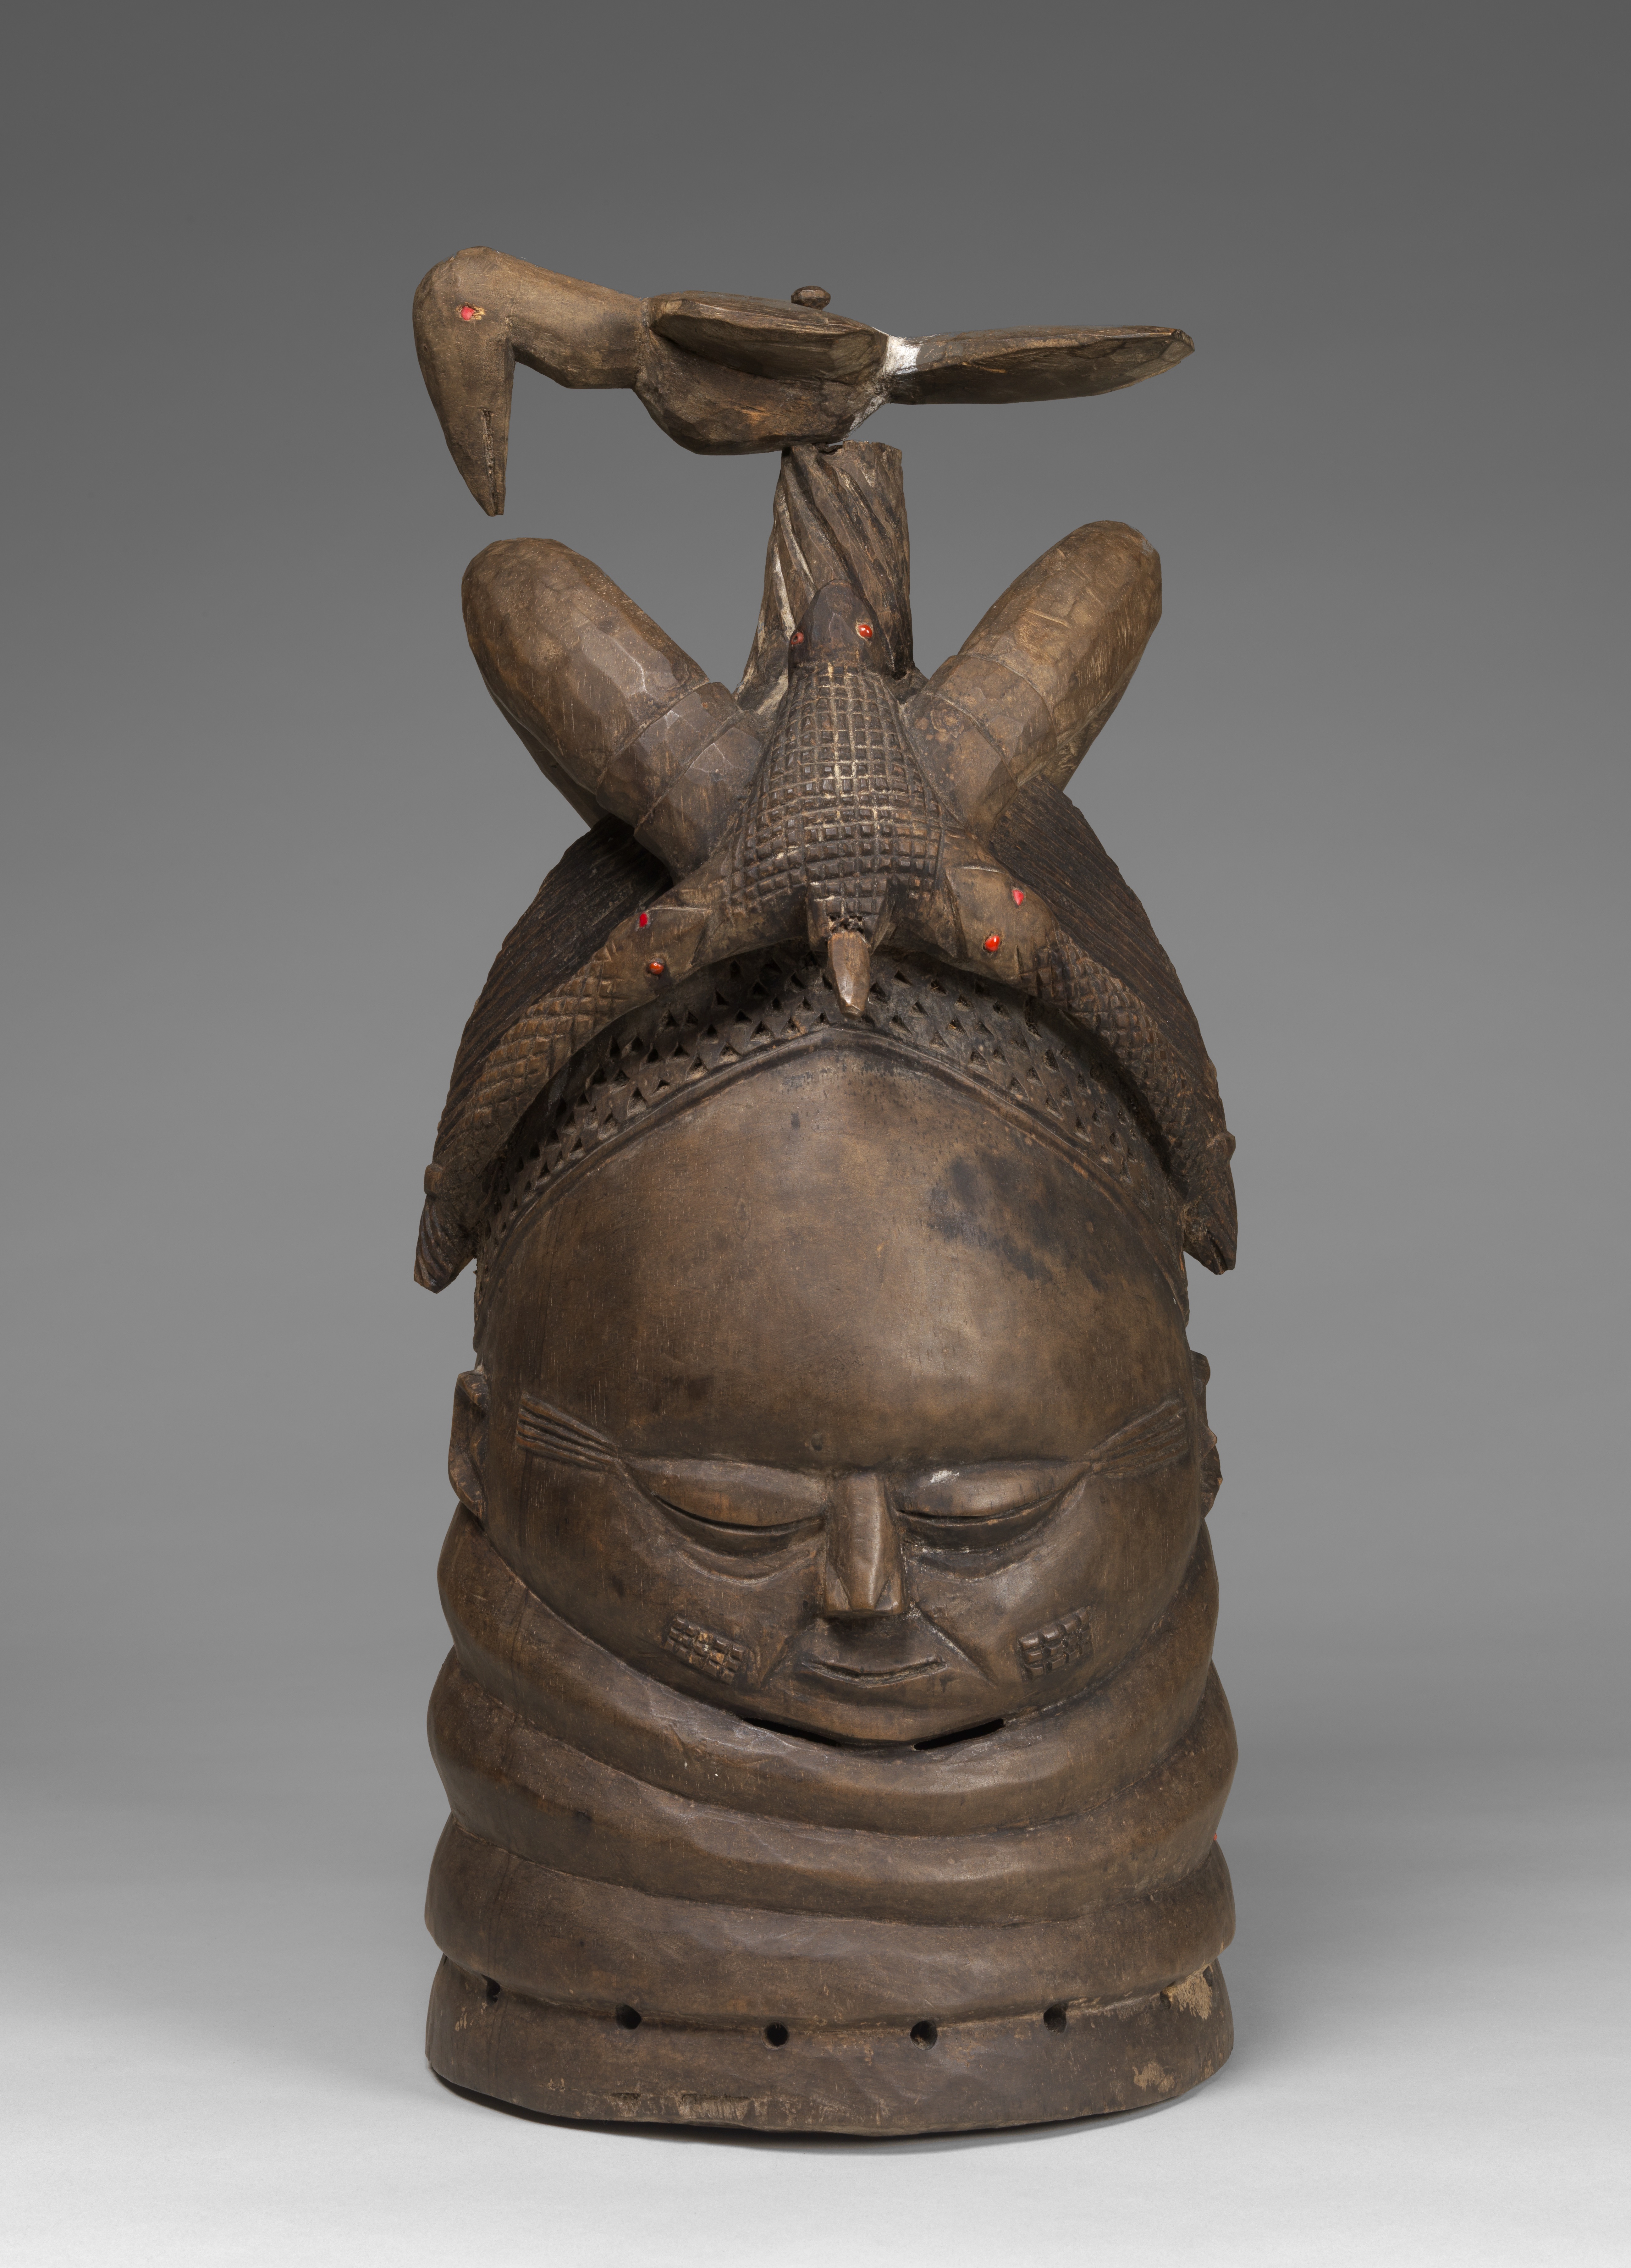 Wood and metal sculpture of a head with closed eyes and a bird shaped headpiece.